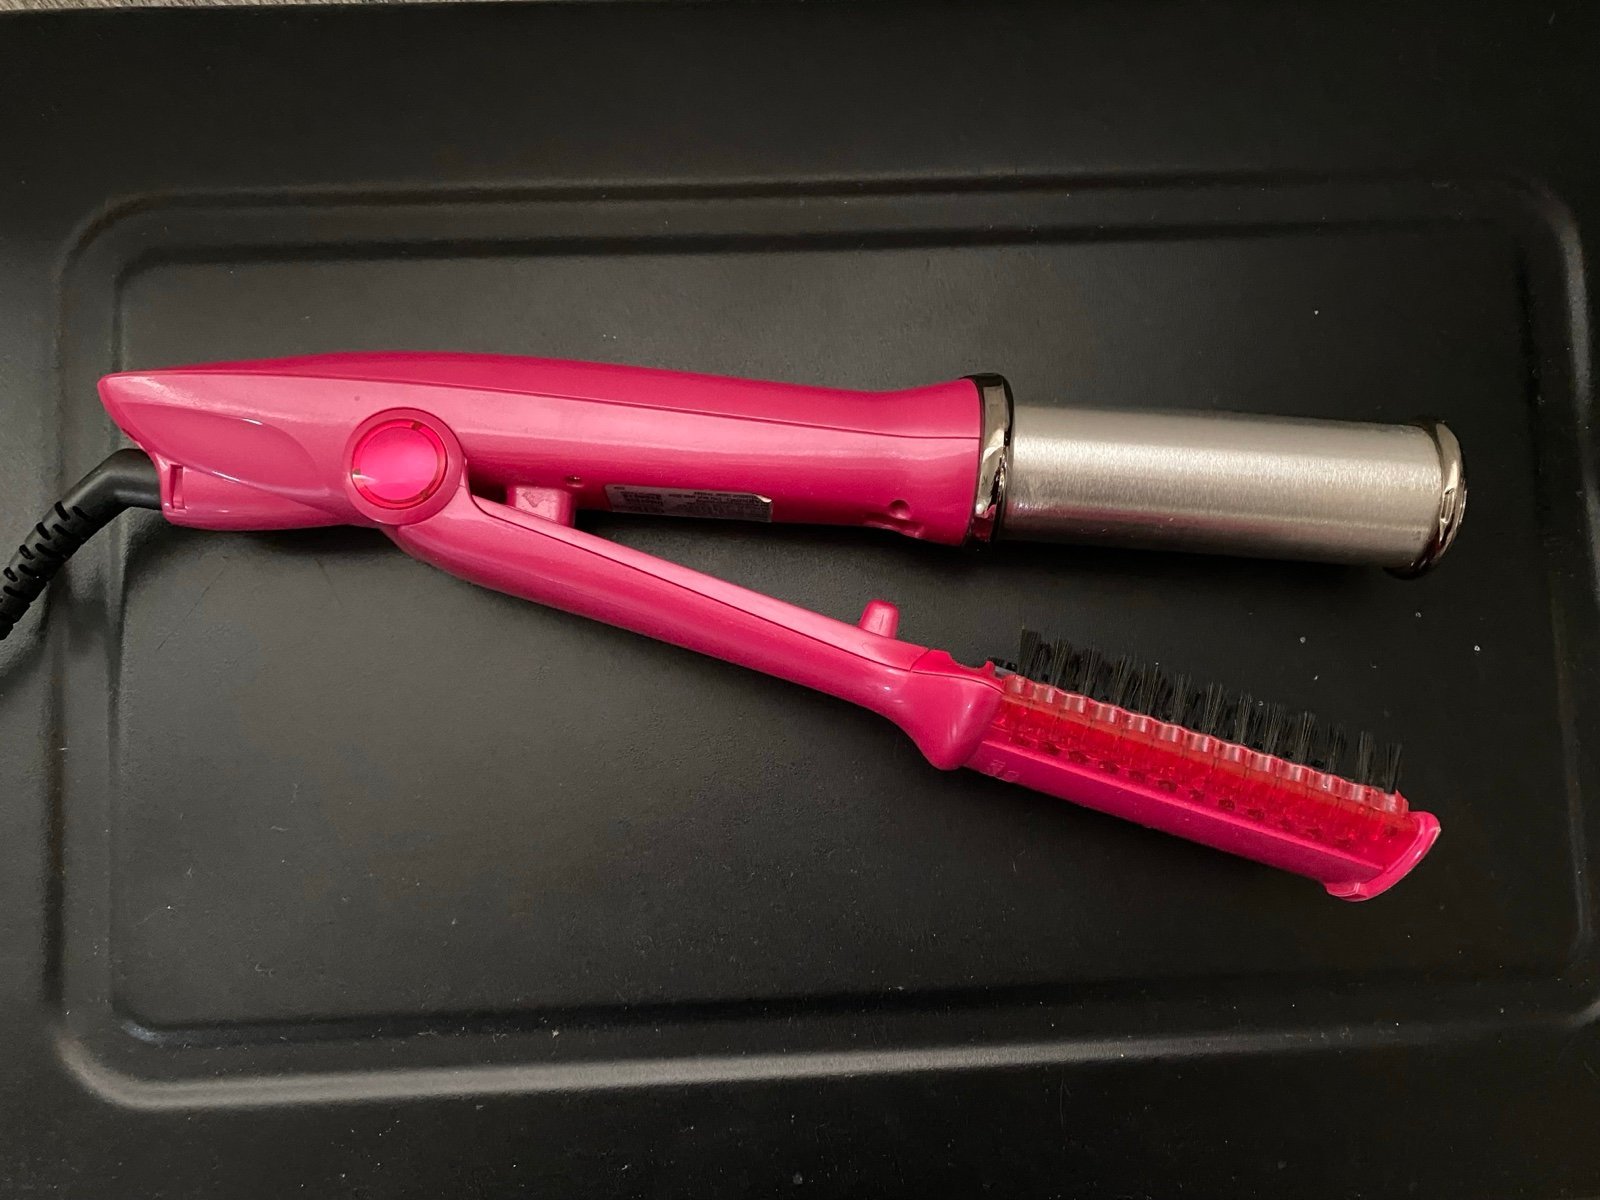 InStyler 3 in 1 rotating iron pink hh23vBN5Y